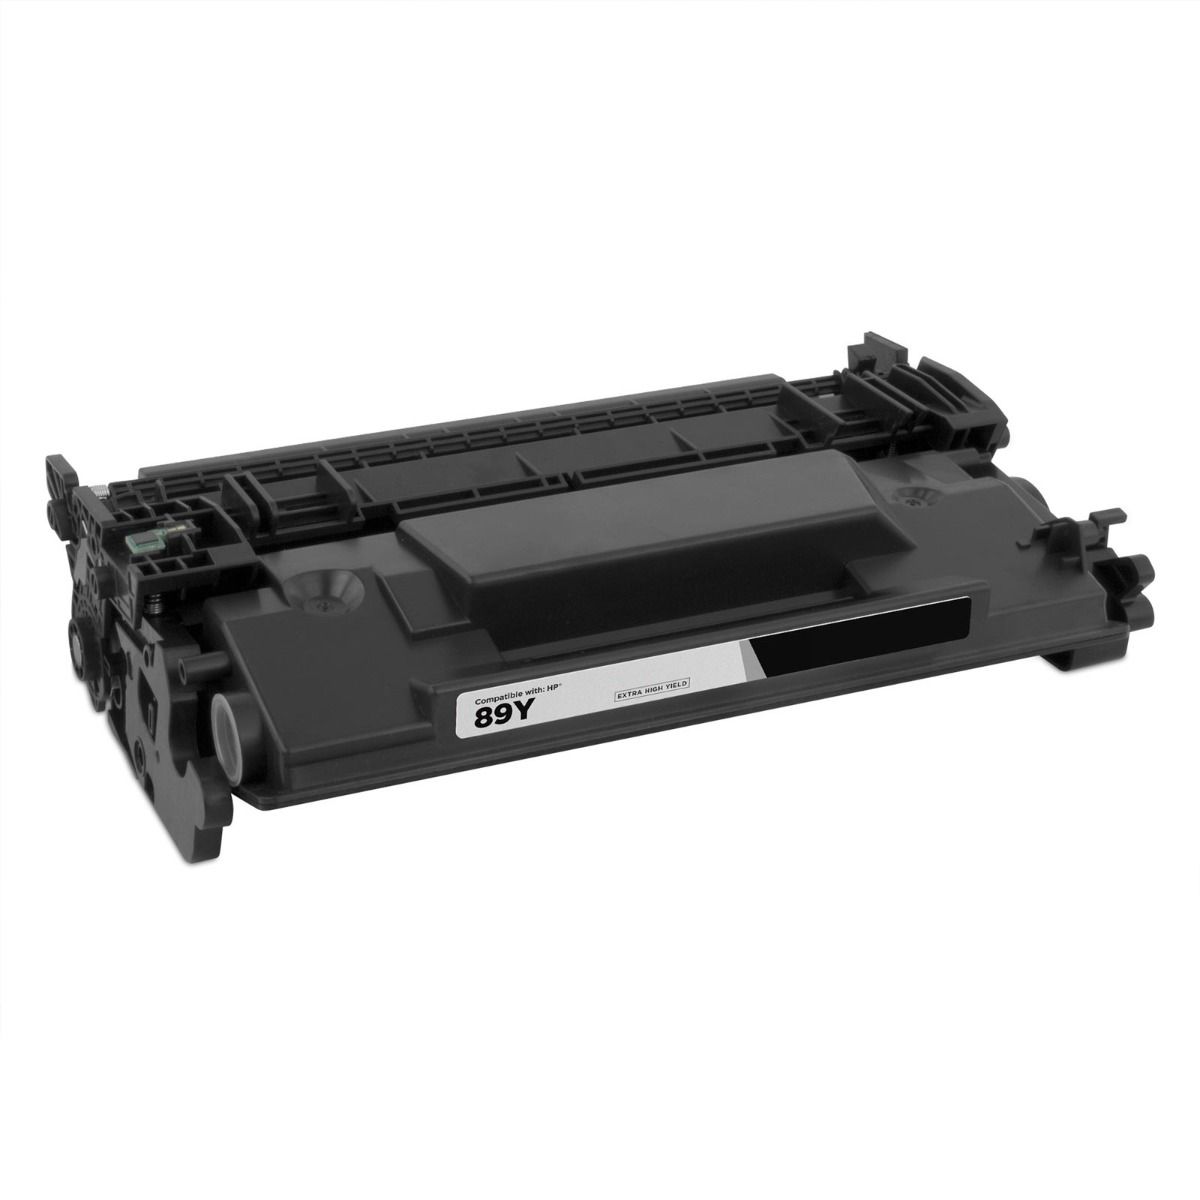 IMPERIAL BRAND Compatible HP 89x CF289x Black Toner Cartridge - No Chip 10,000 pages